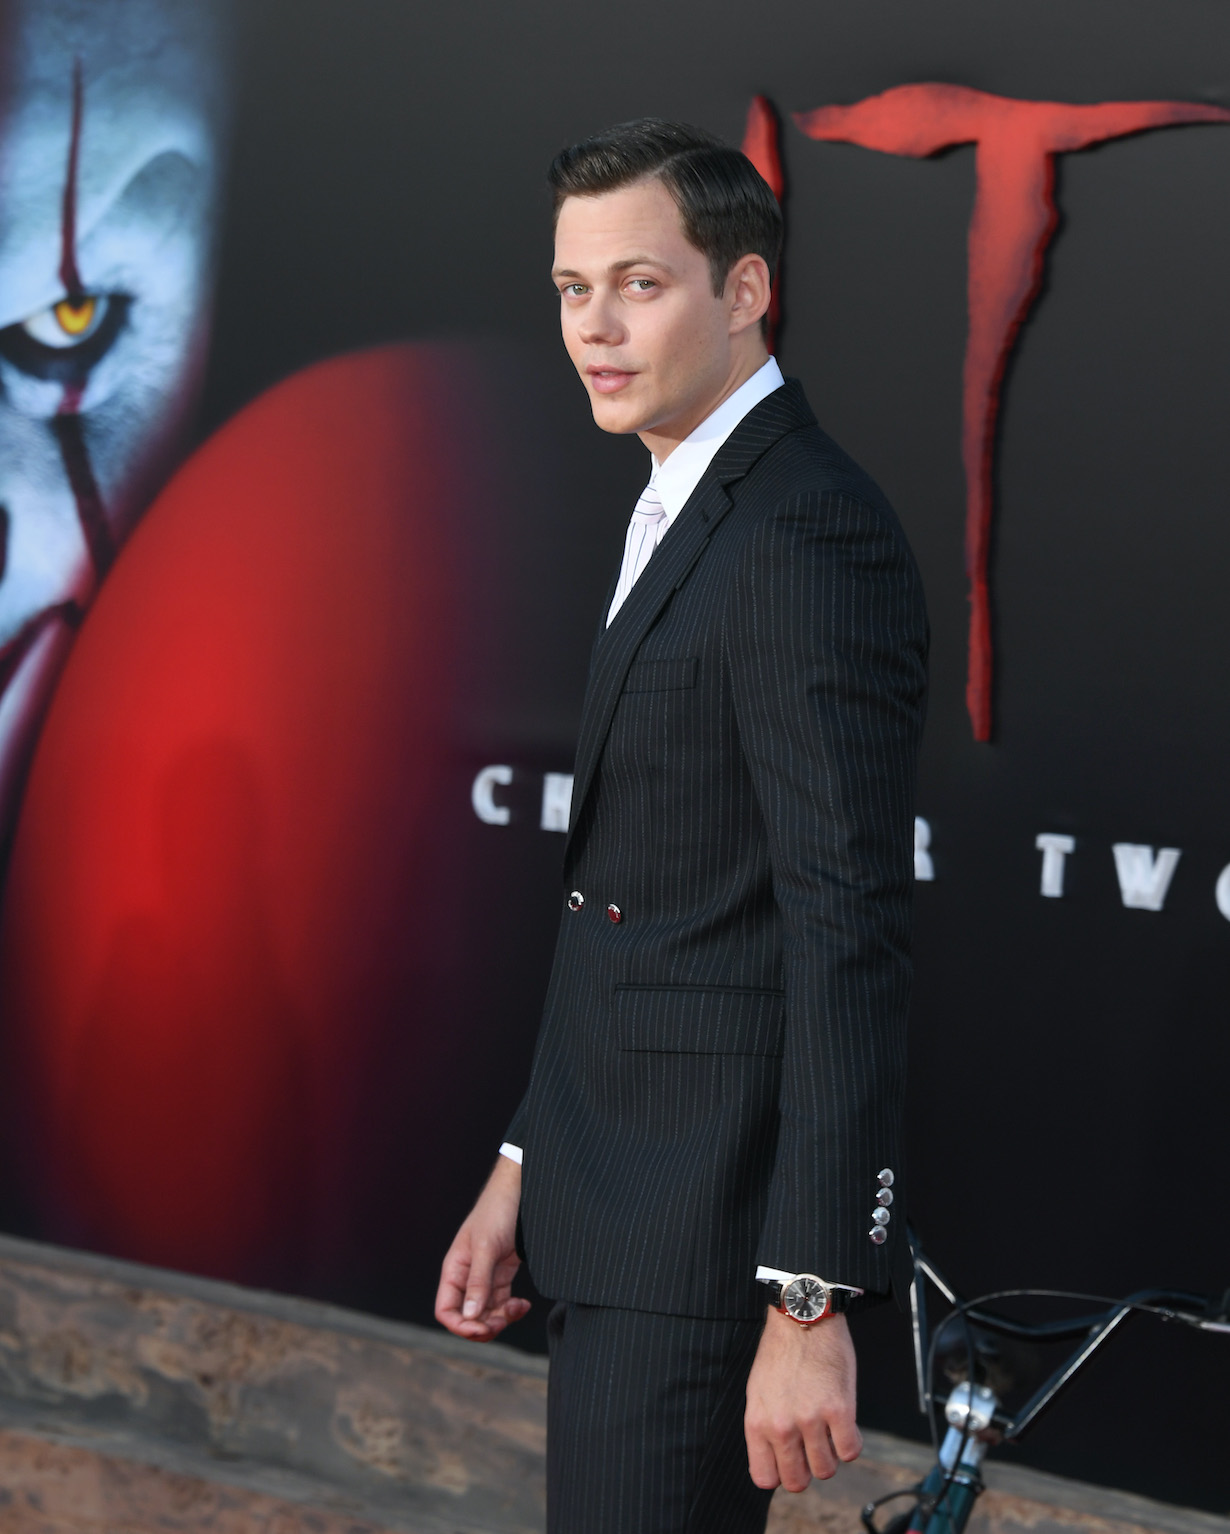 Bill Skarsgard attends the Premiere Of Warner Bros. Pictures' "It Chapter Two"